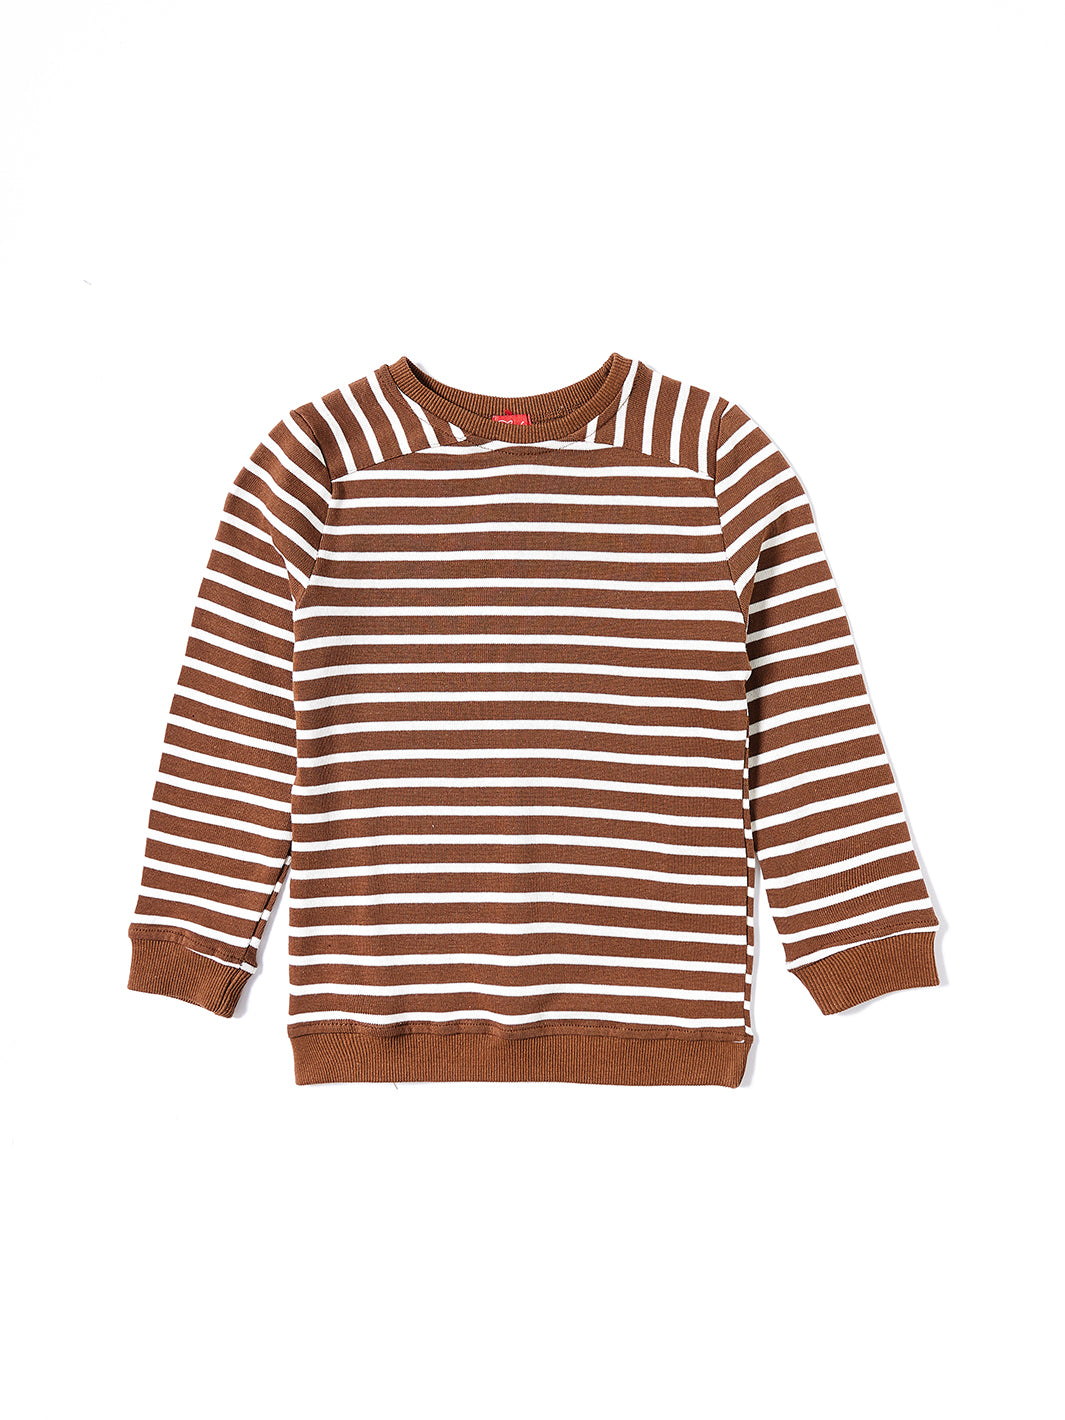 Shoulder Patch Classic Striped Top - Brown